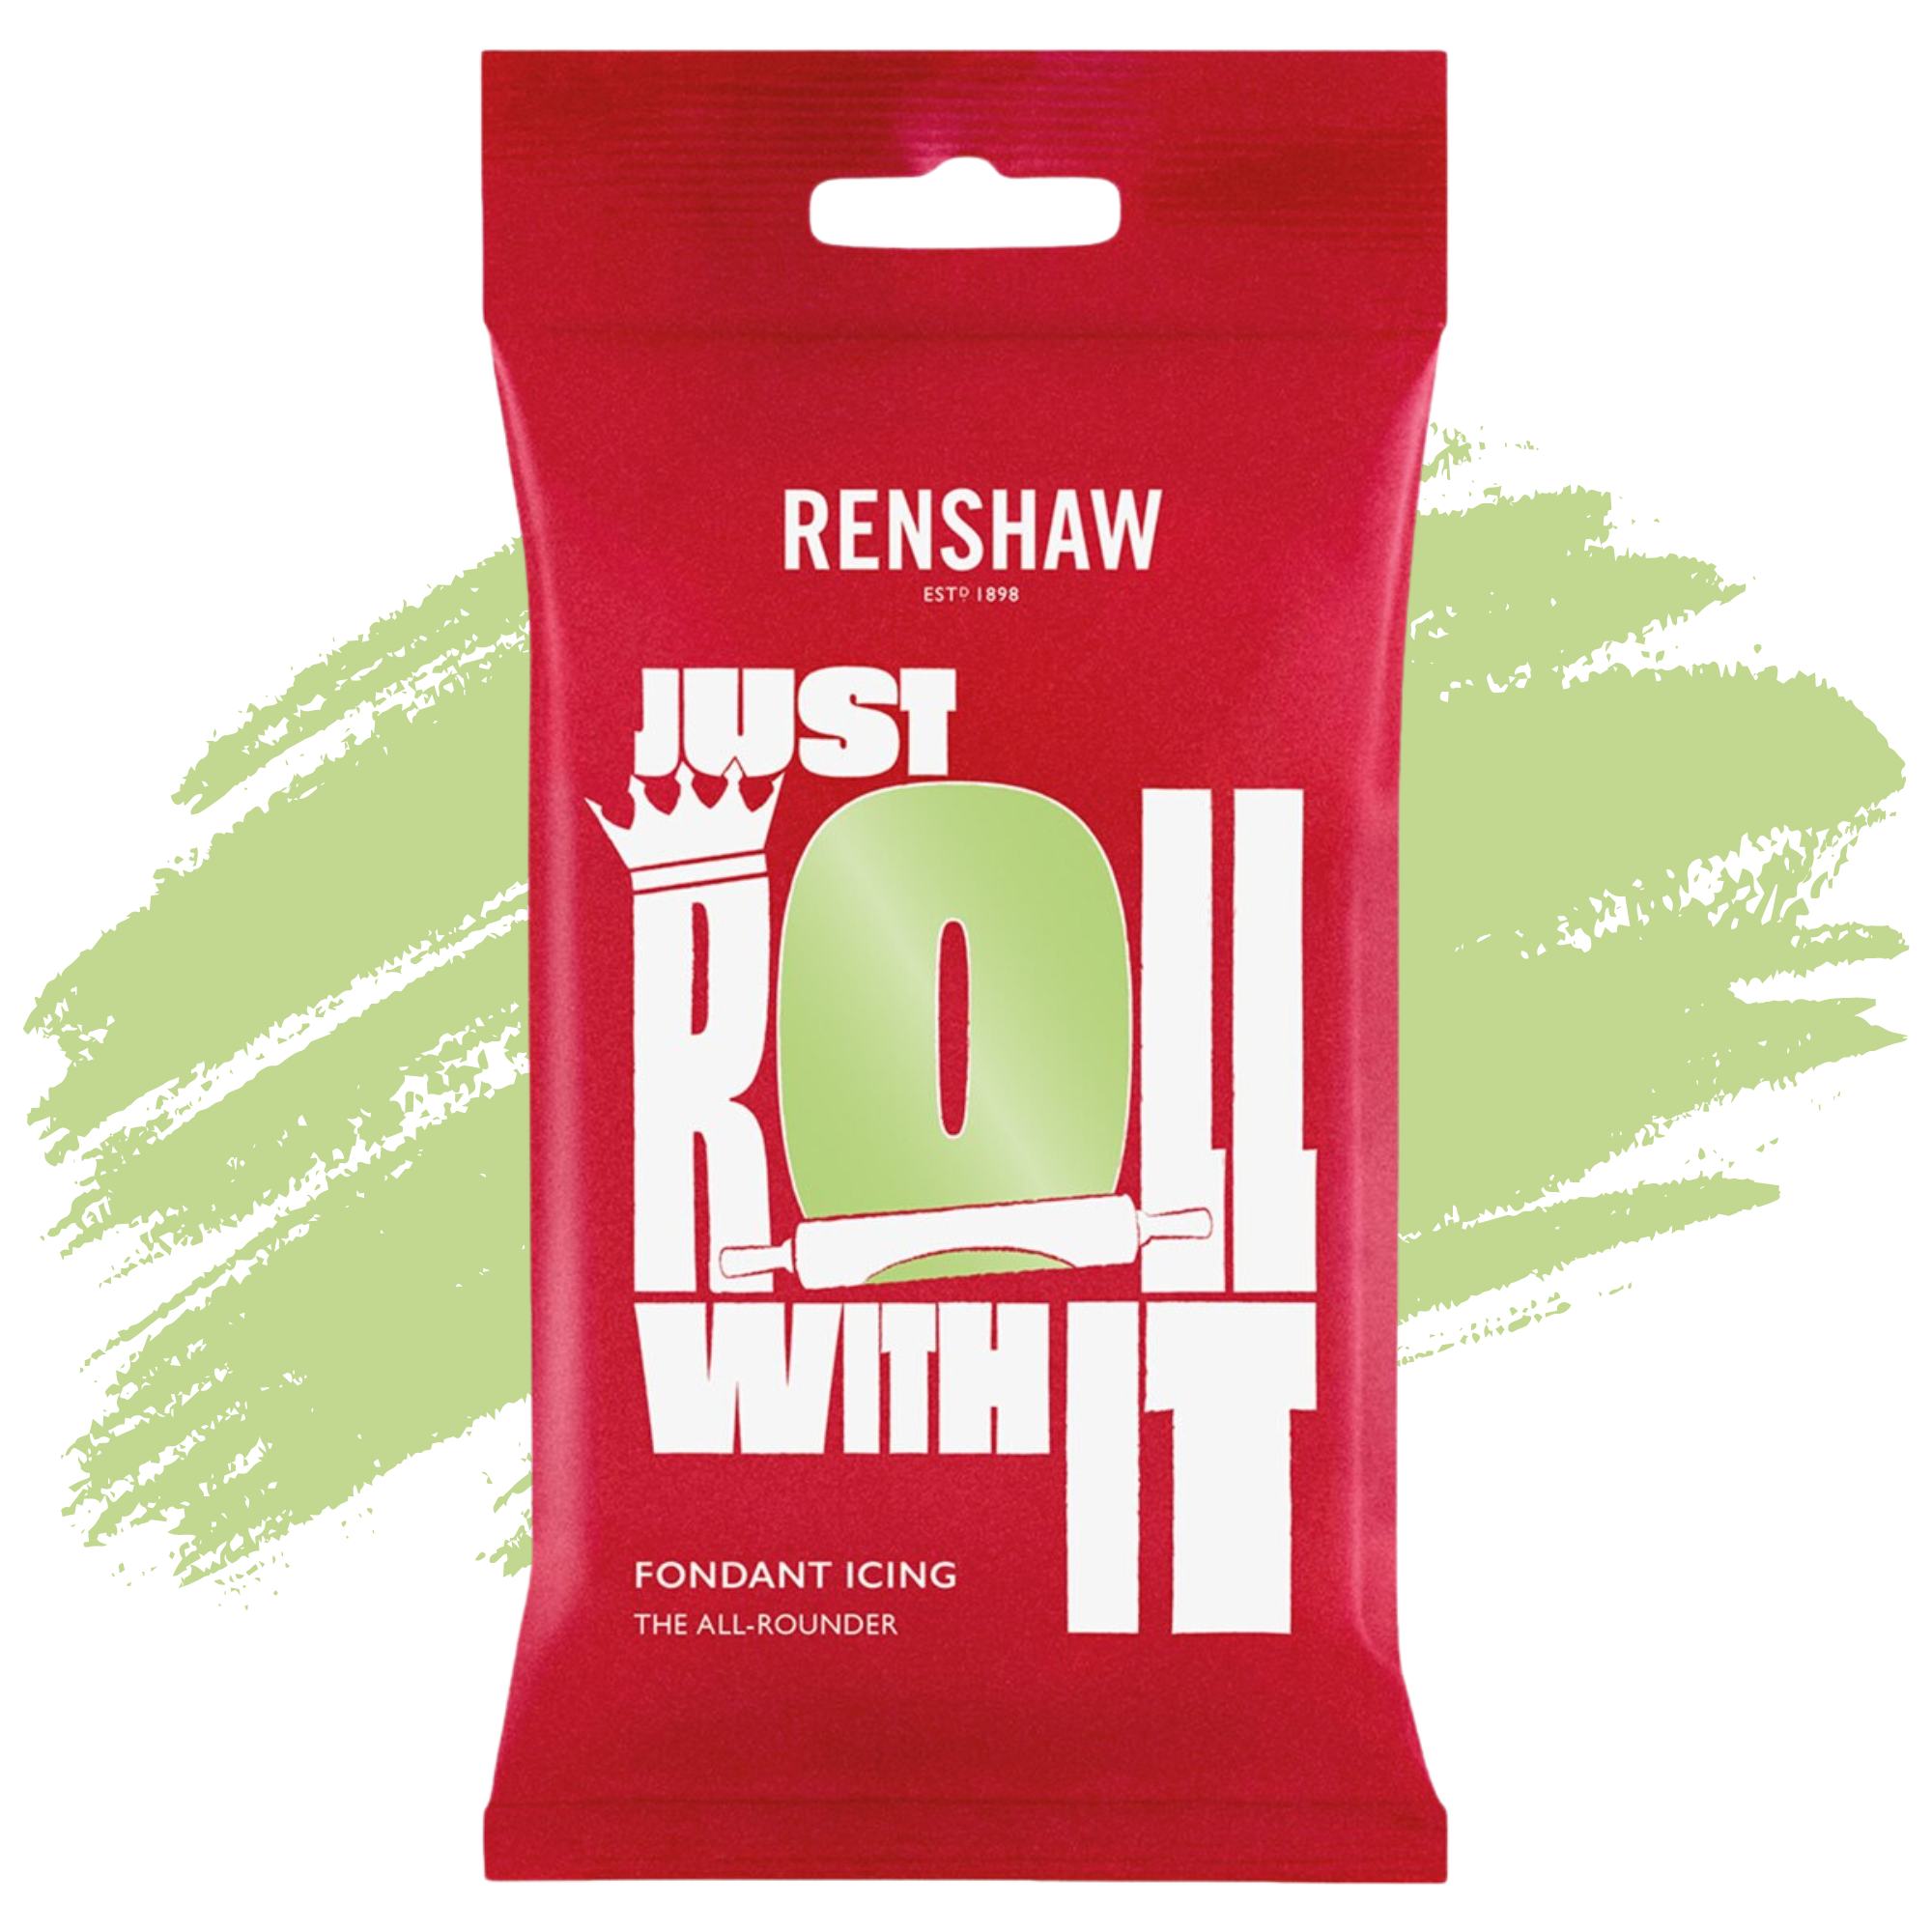 Renshaw Professional Sugar Paste Ready to Roll Fondant Just Roll with it Icing - Pastel Green - 250g